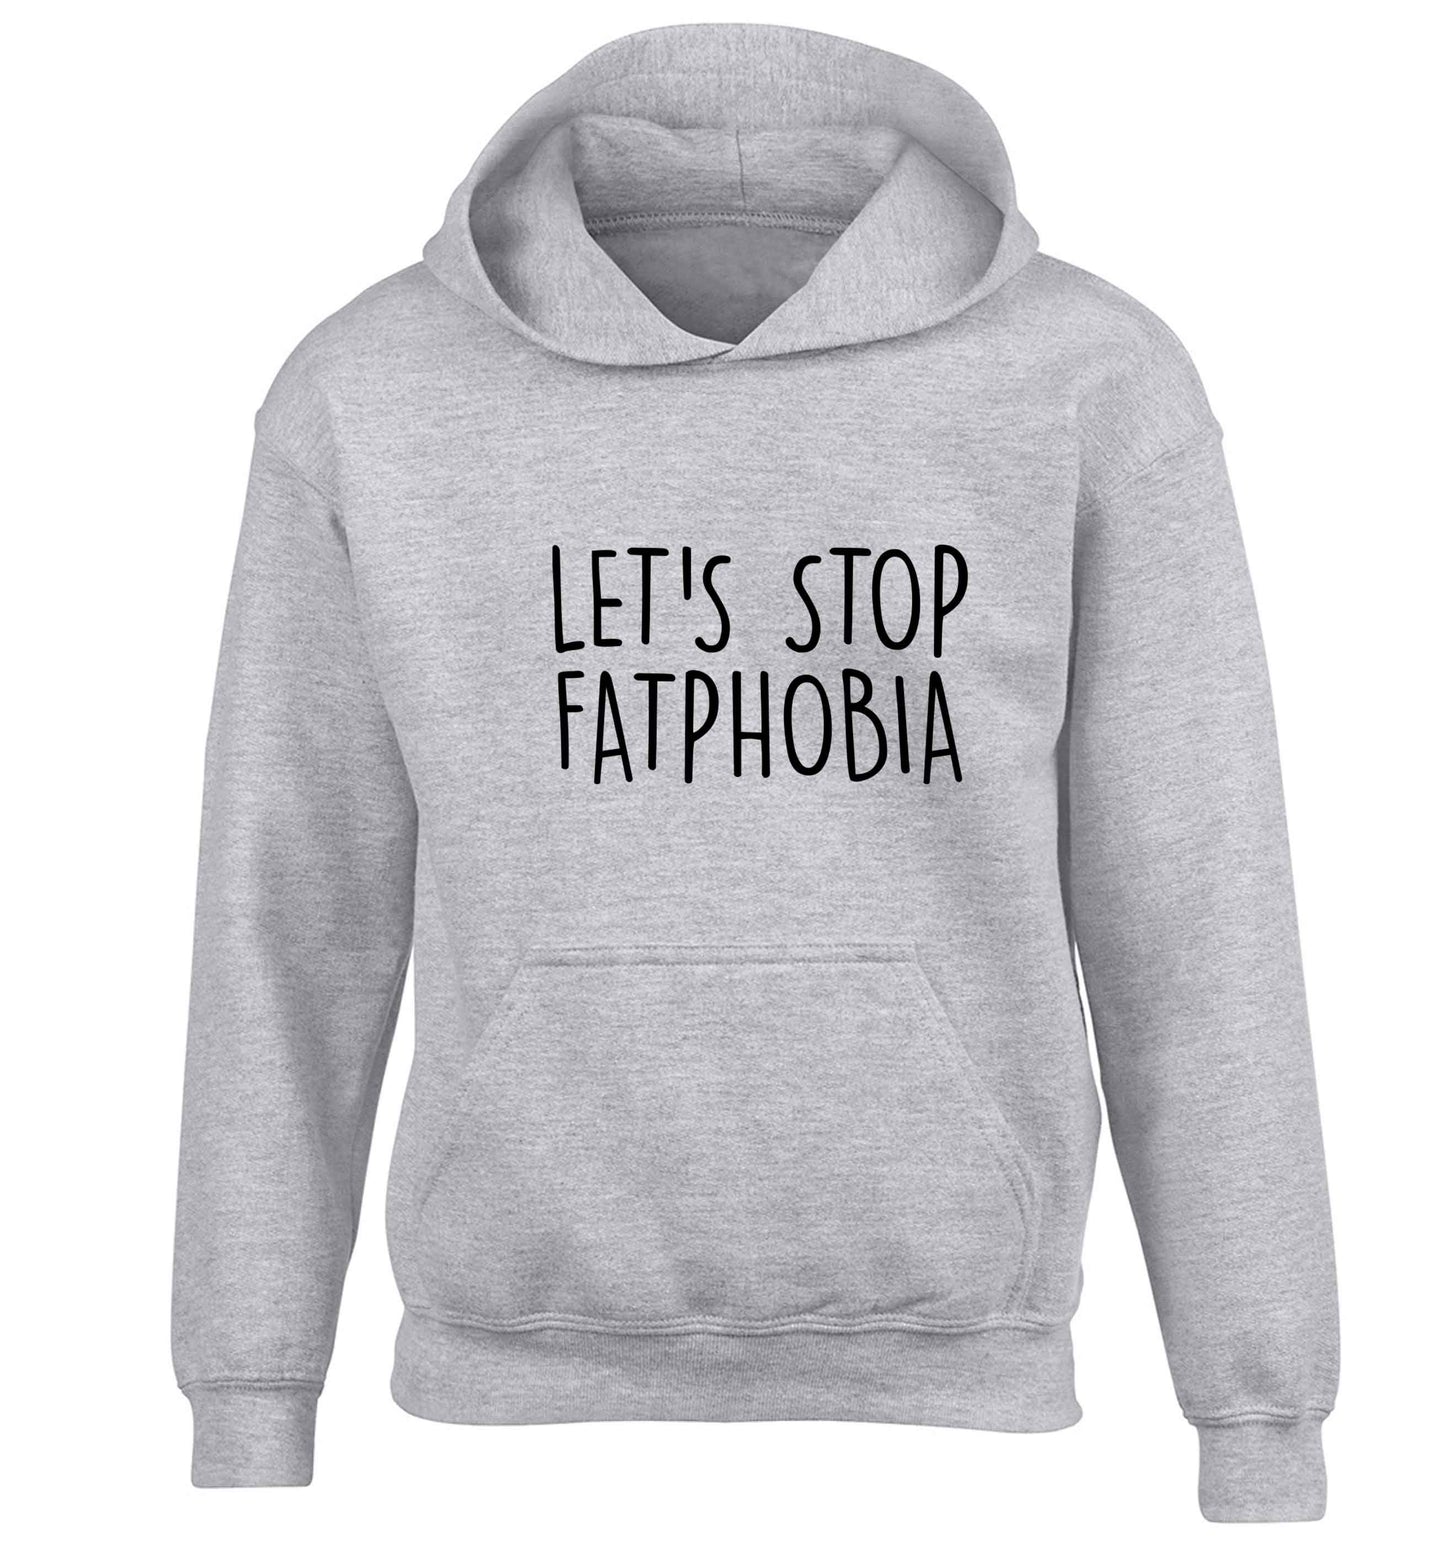 Let's stop fatphobia children's grey hoodie 12-13 Years